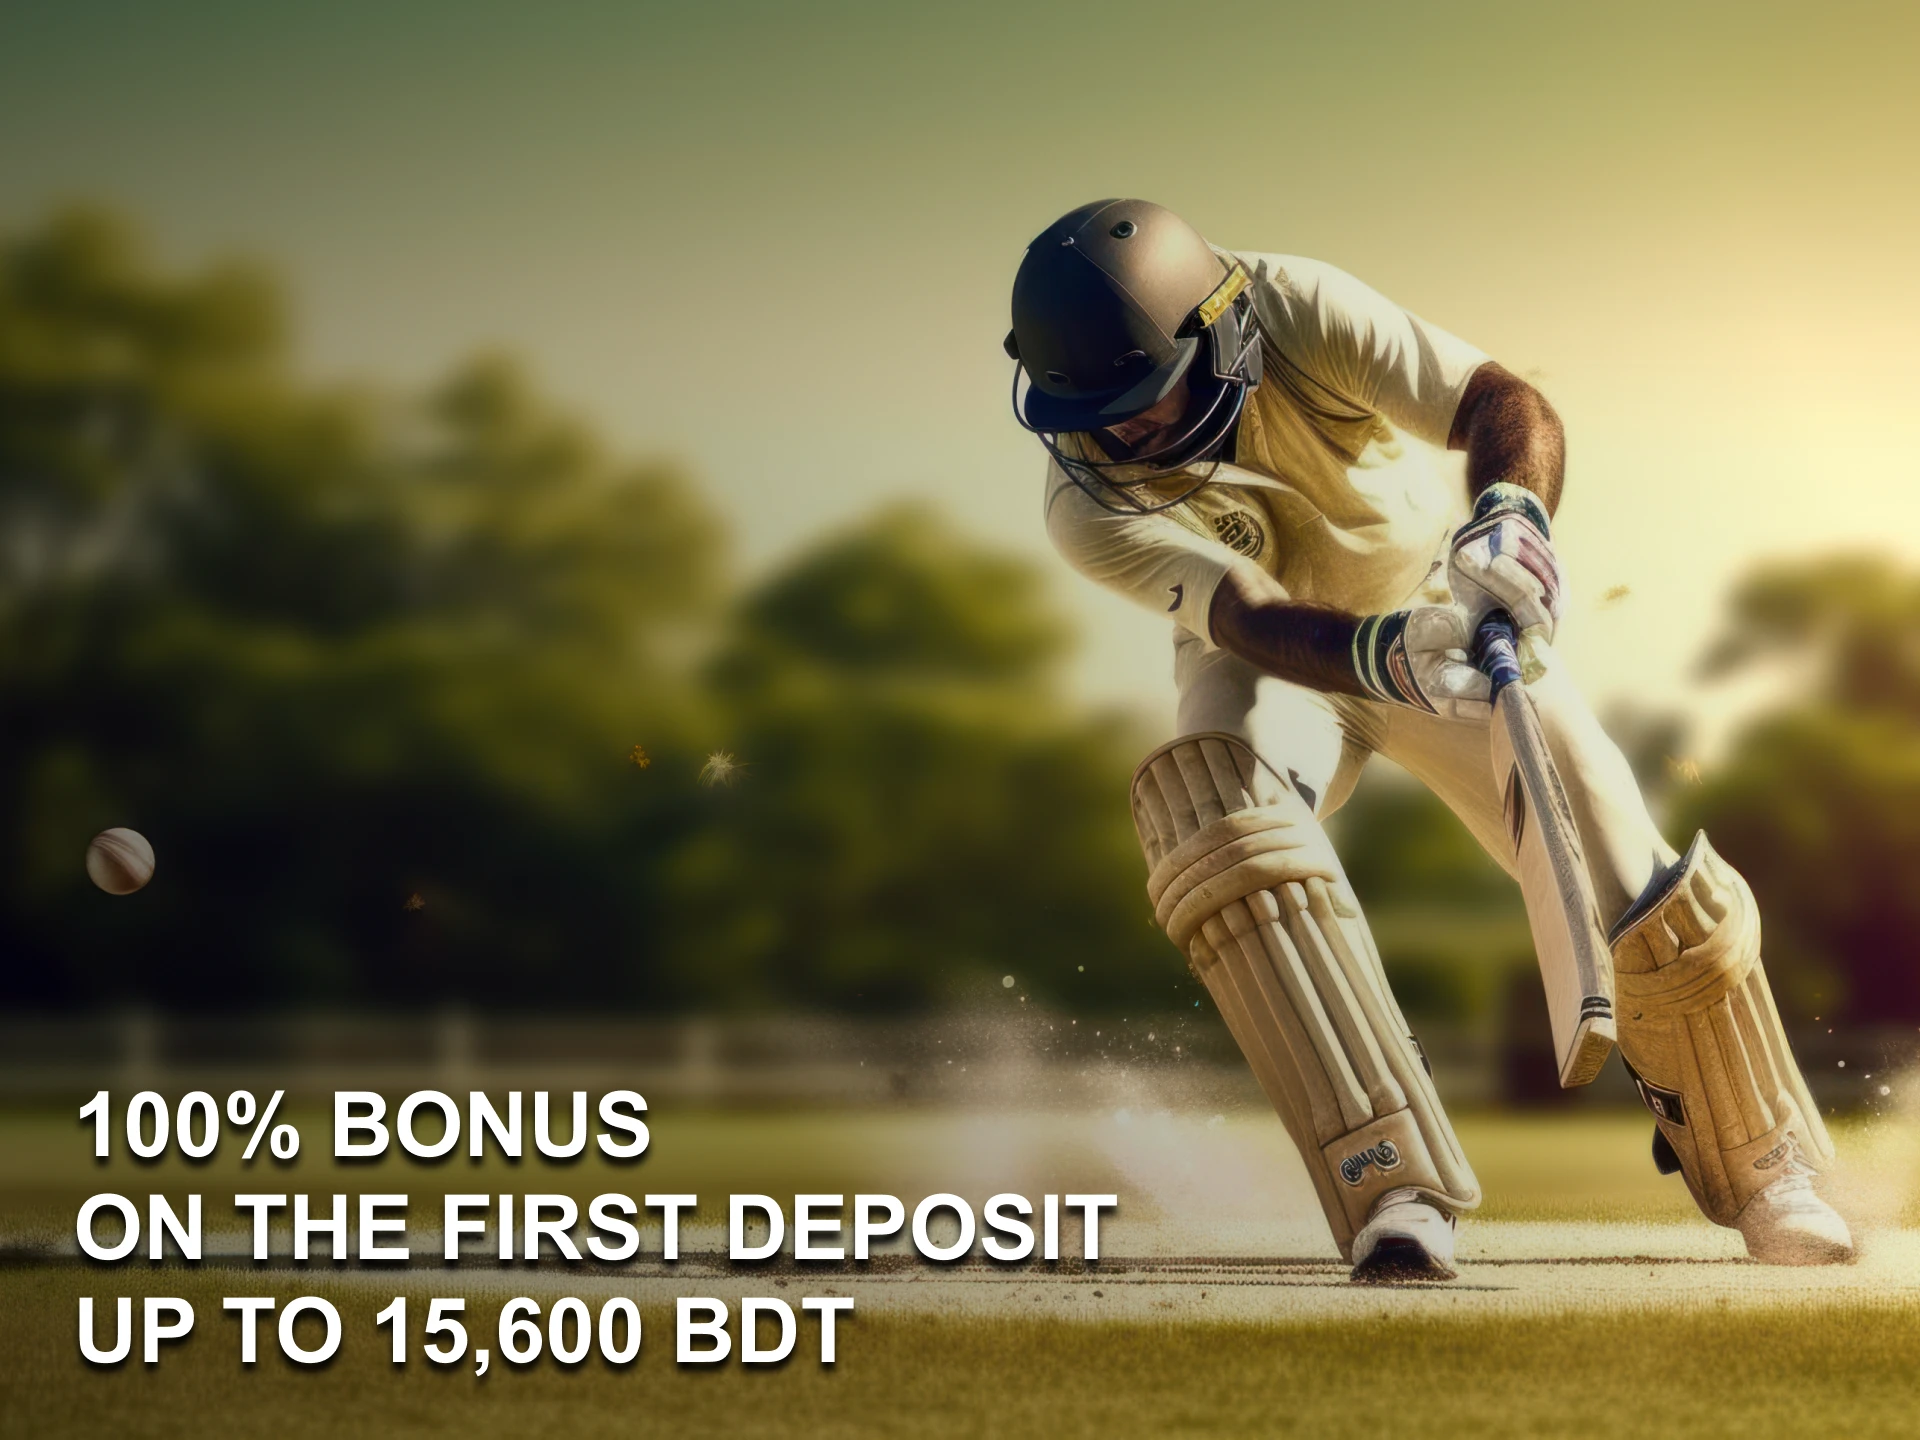 If you are a new user at 1xBet, you can get a 15,600 BDT bonus on your first deposit.